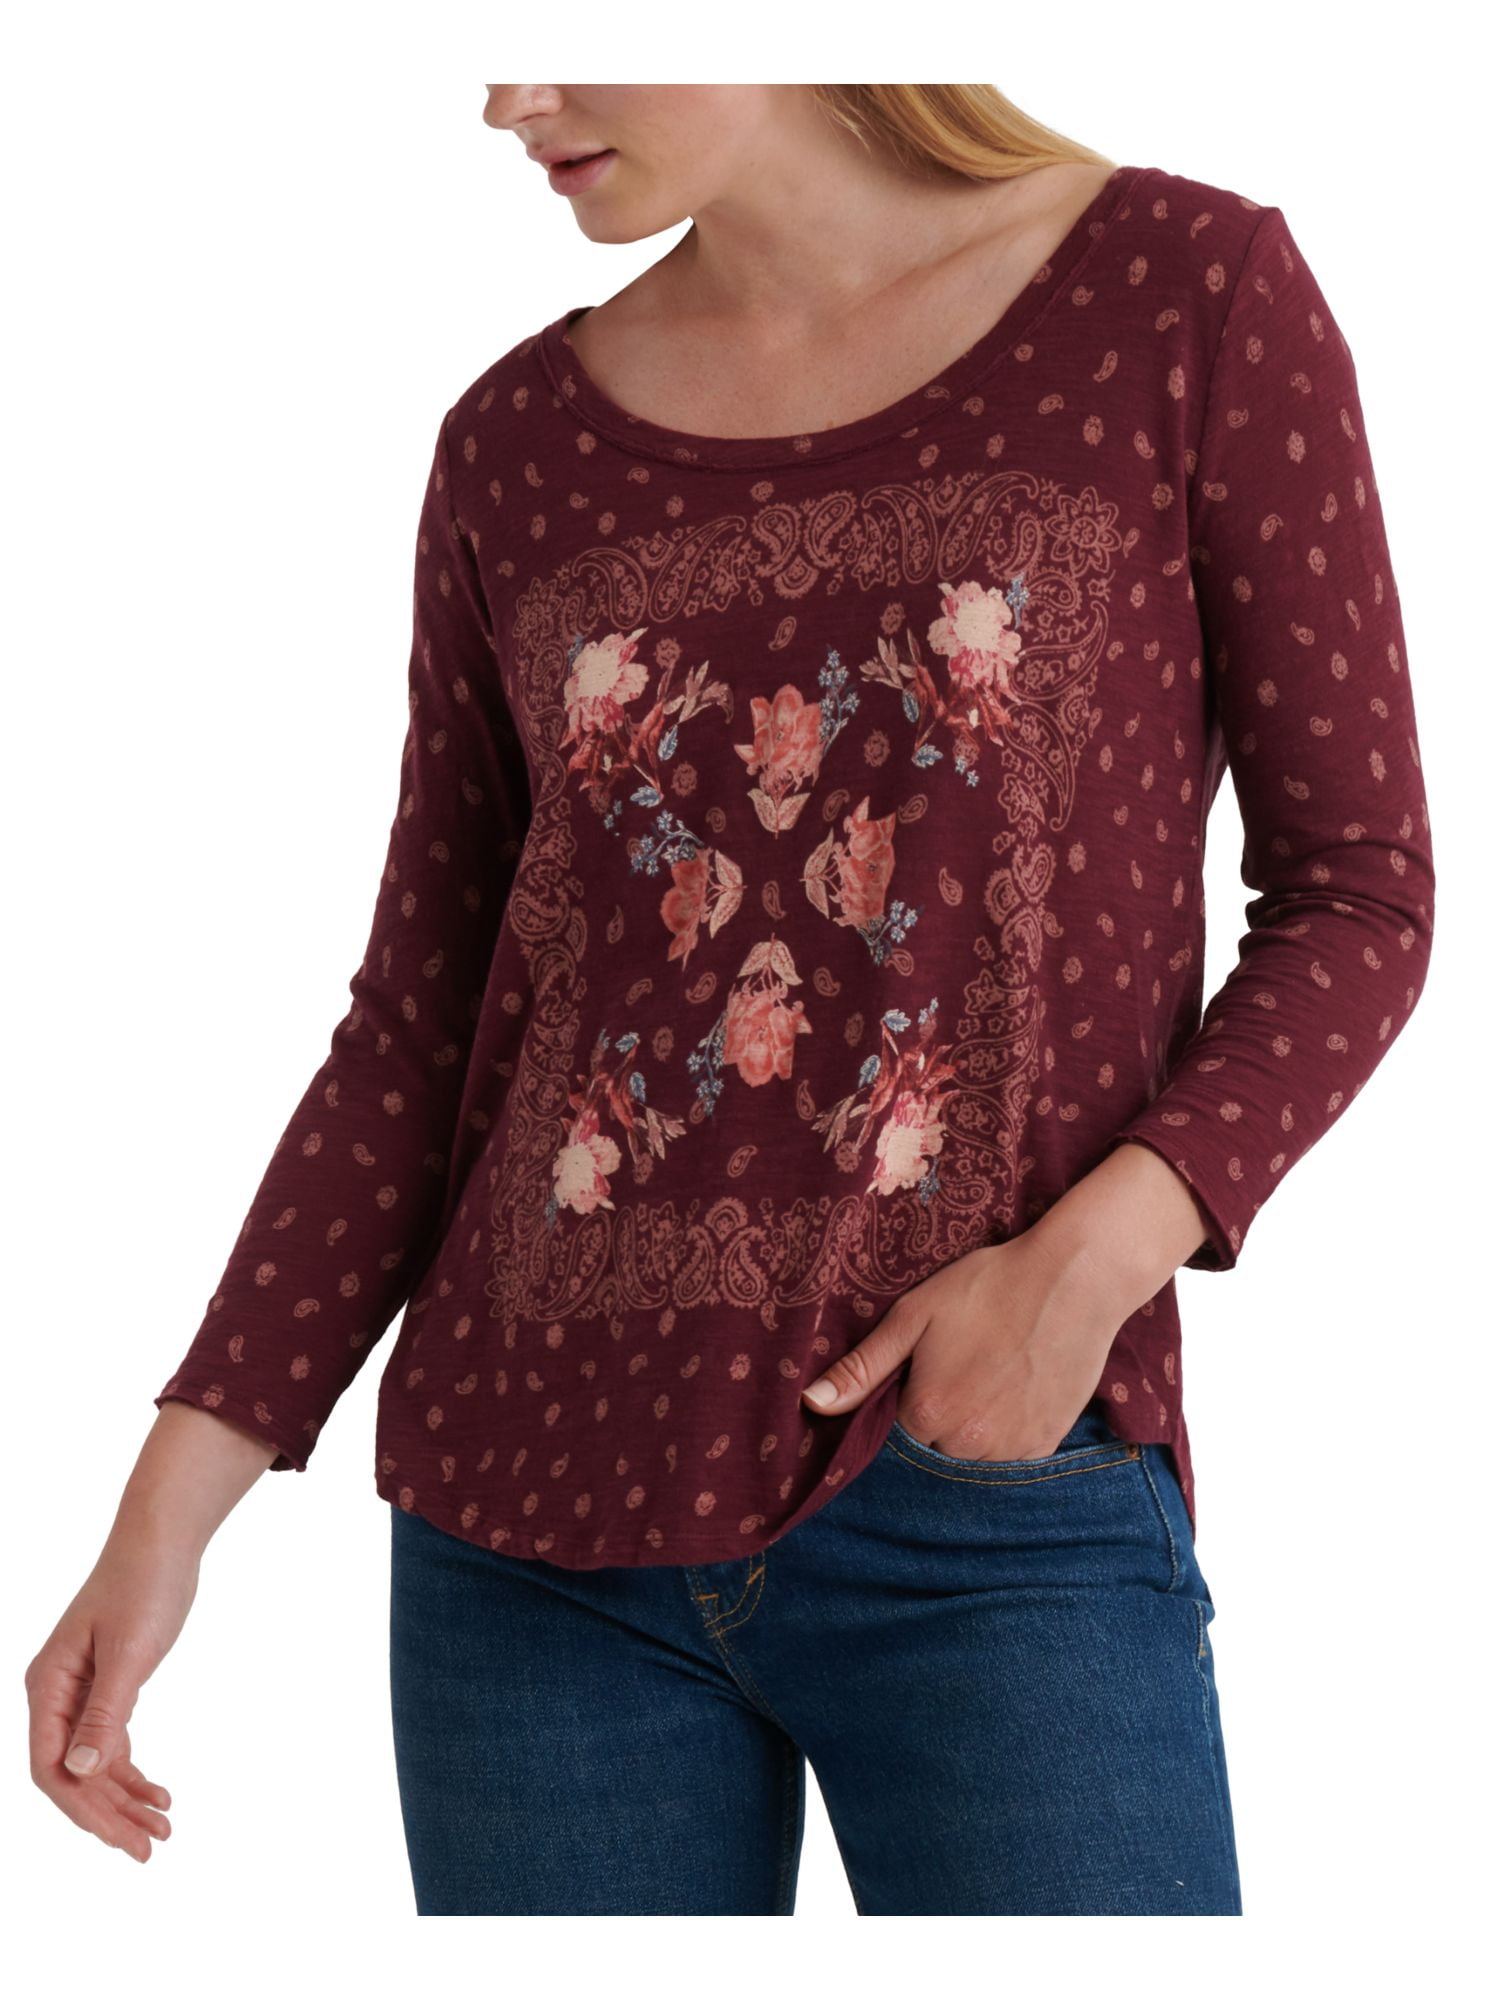 LUCKY BRAND Womens Maroon Printed Long Sleeve Scoop Neck T-Shirt Size: S 